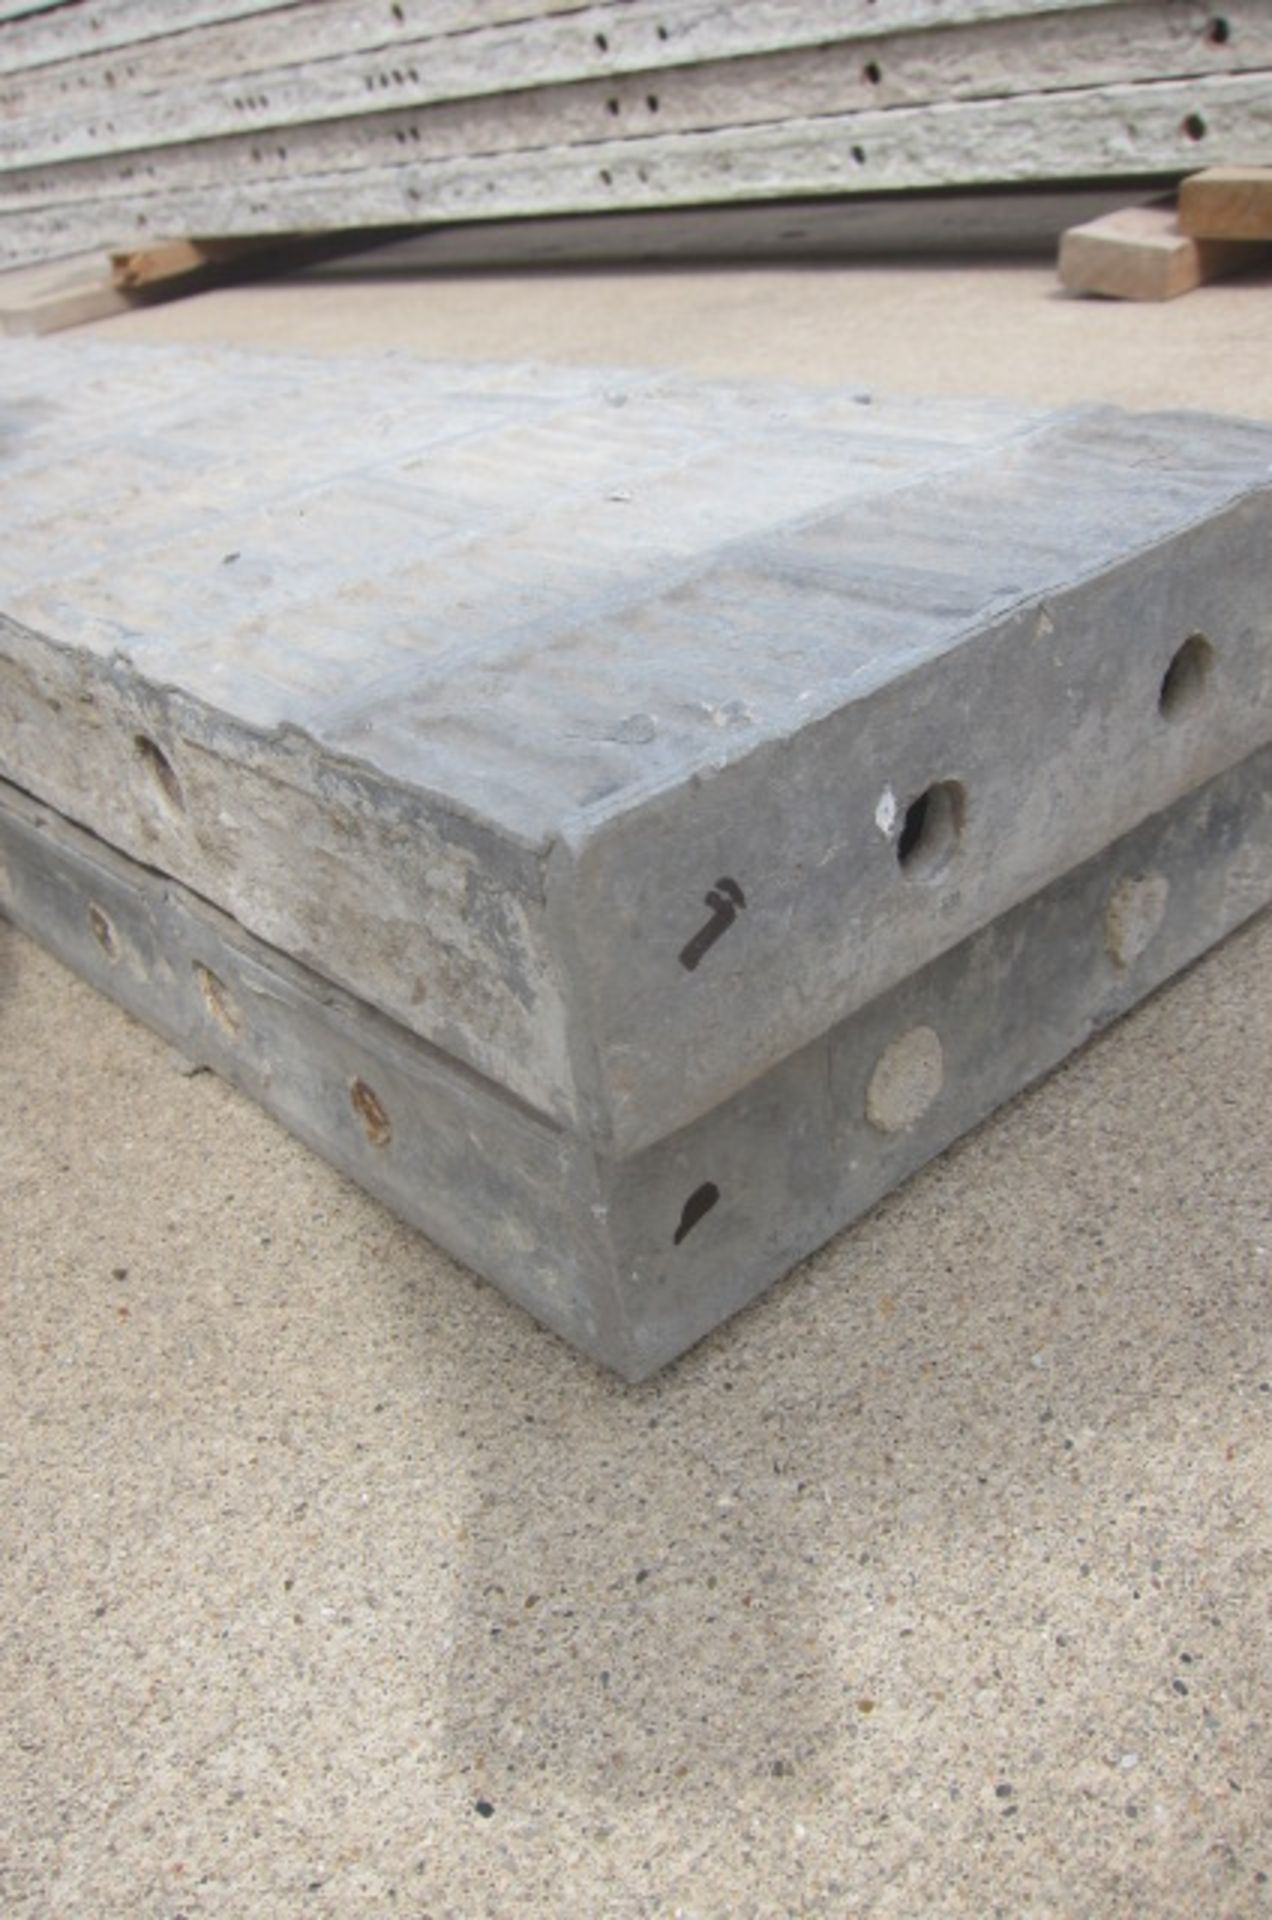 (2) 9" X 8' Wall-ties Aluminum Concrete Forms, VertiBrick, 6-12 Hole Pattern, Nice Clean Set, - Image 2 of 3